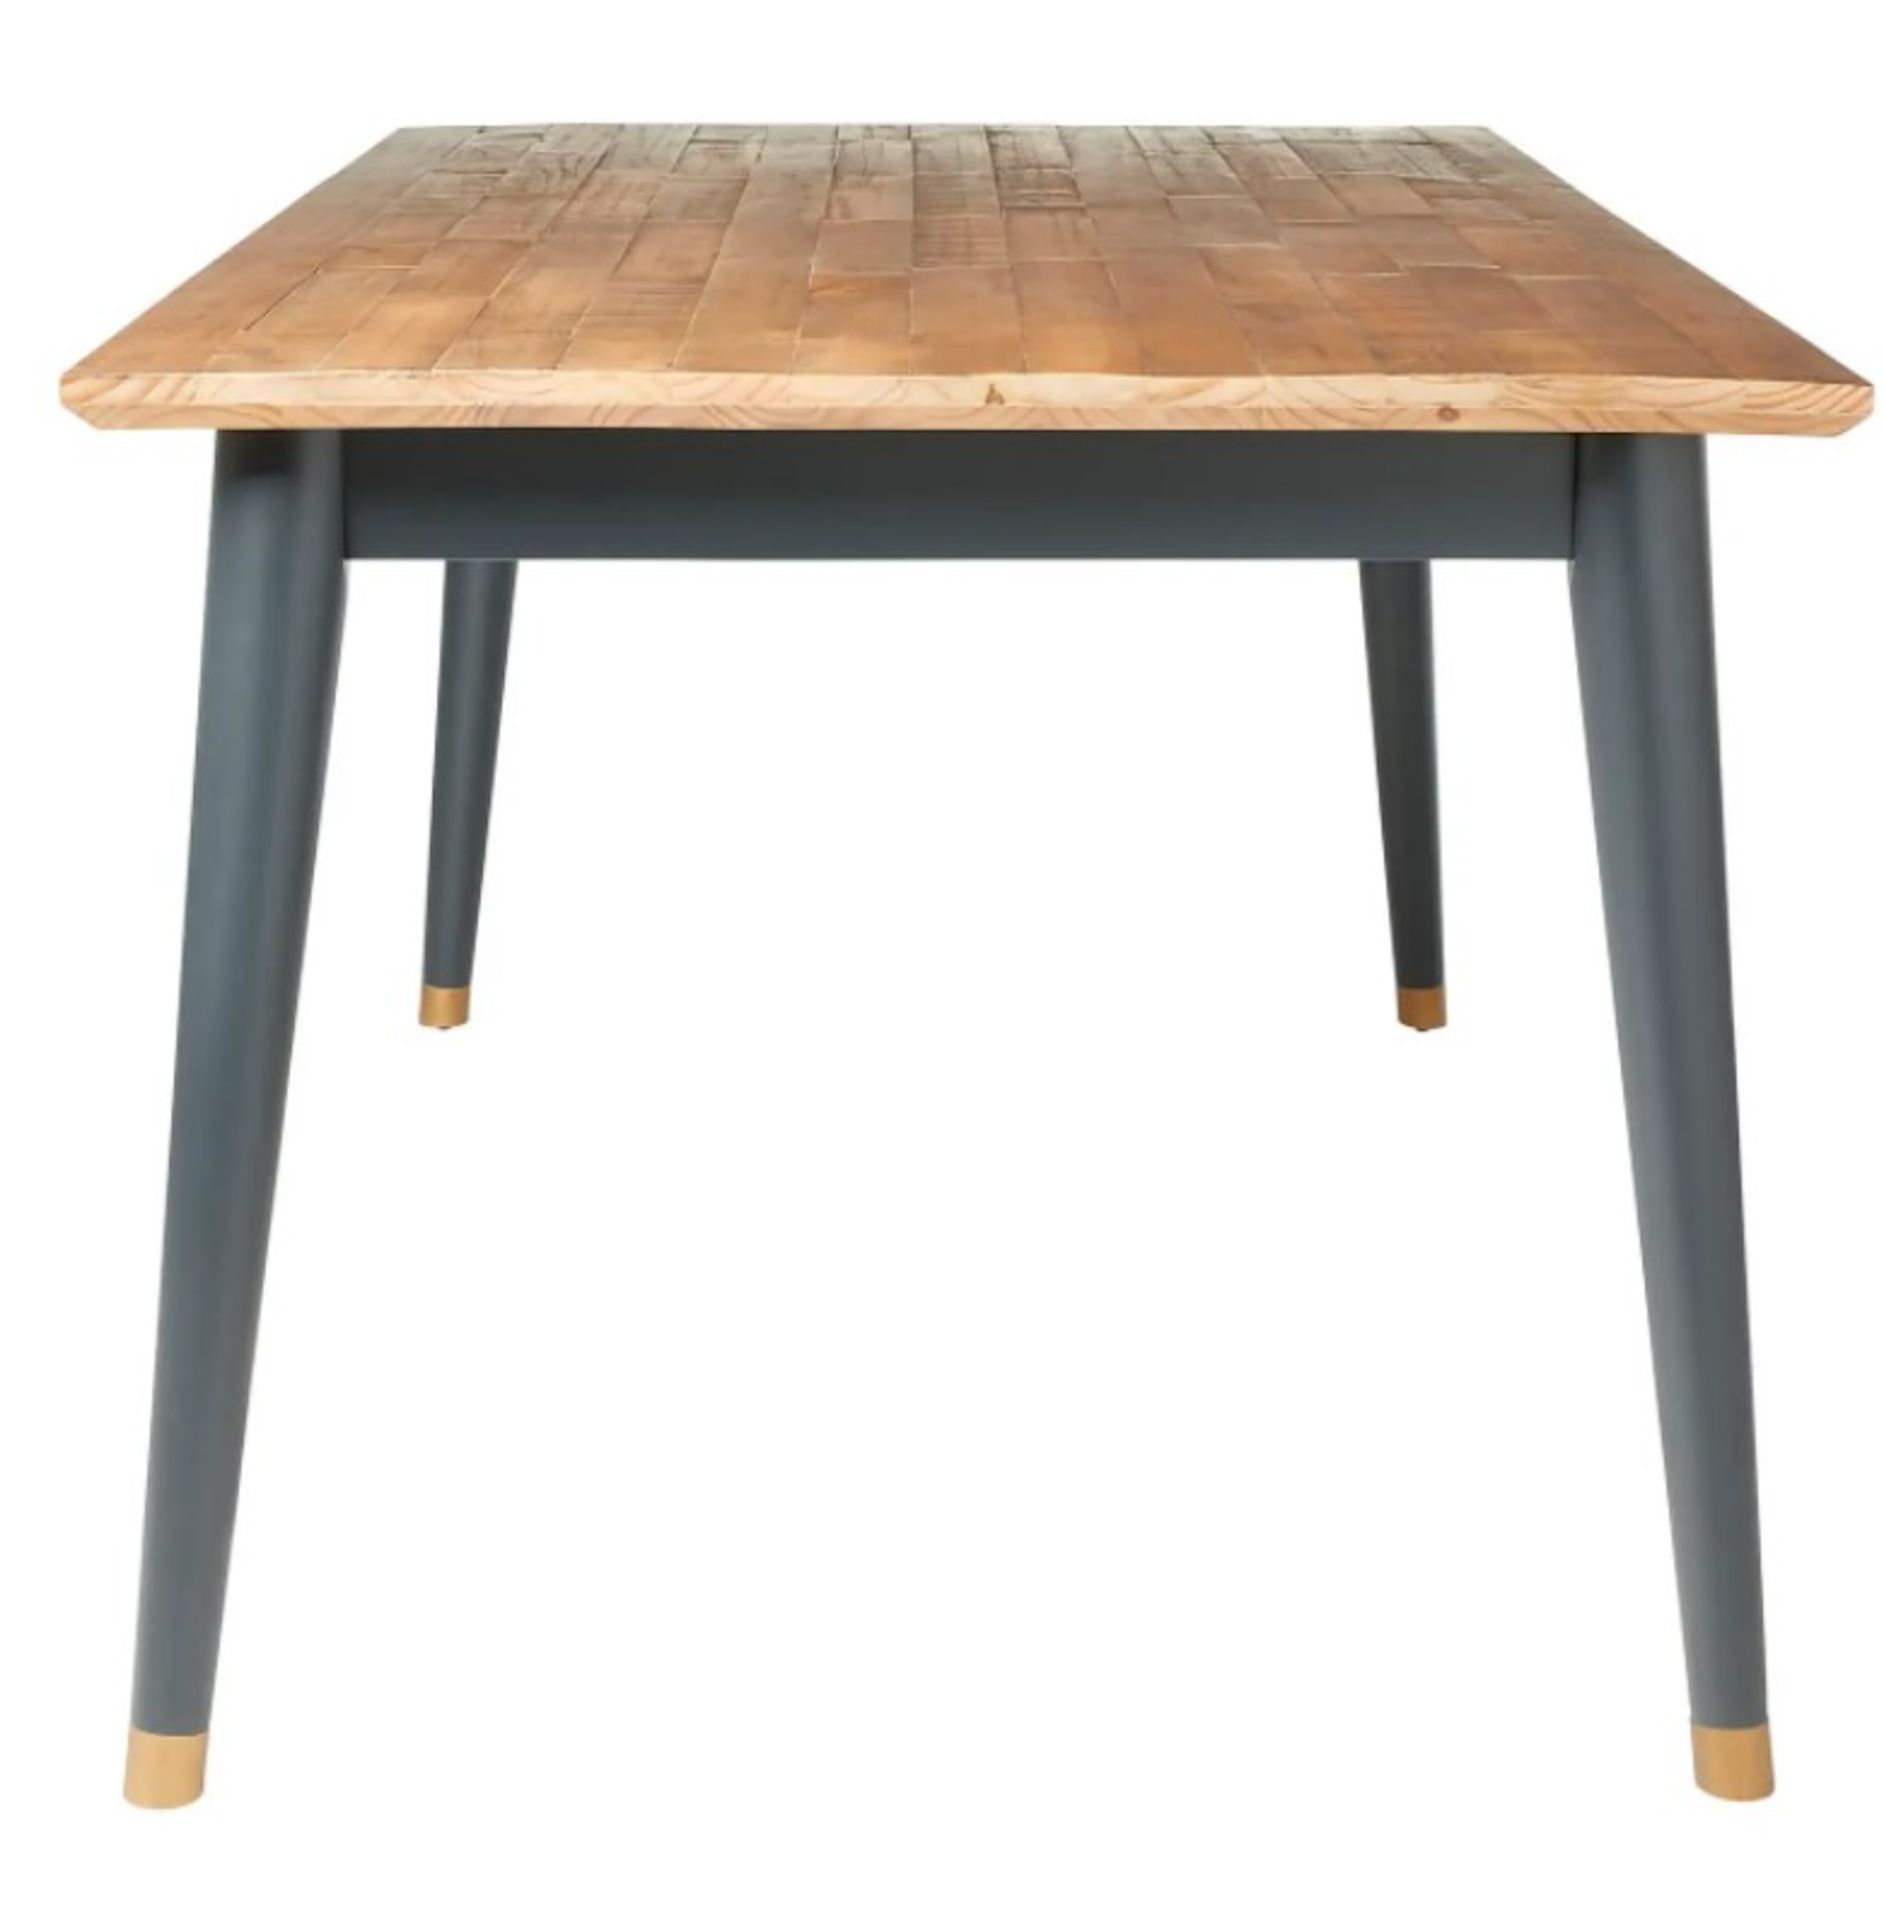 (Mz) 1x Franklin Dining Table RRP £395. (H)78 x (W)160 x (D)90cm - Image 3 of 4